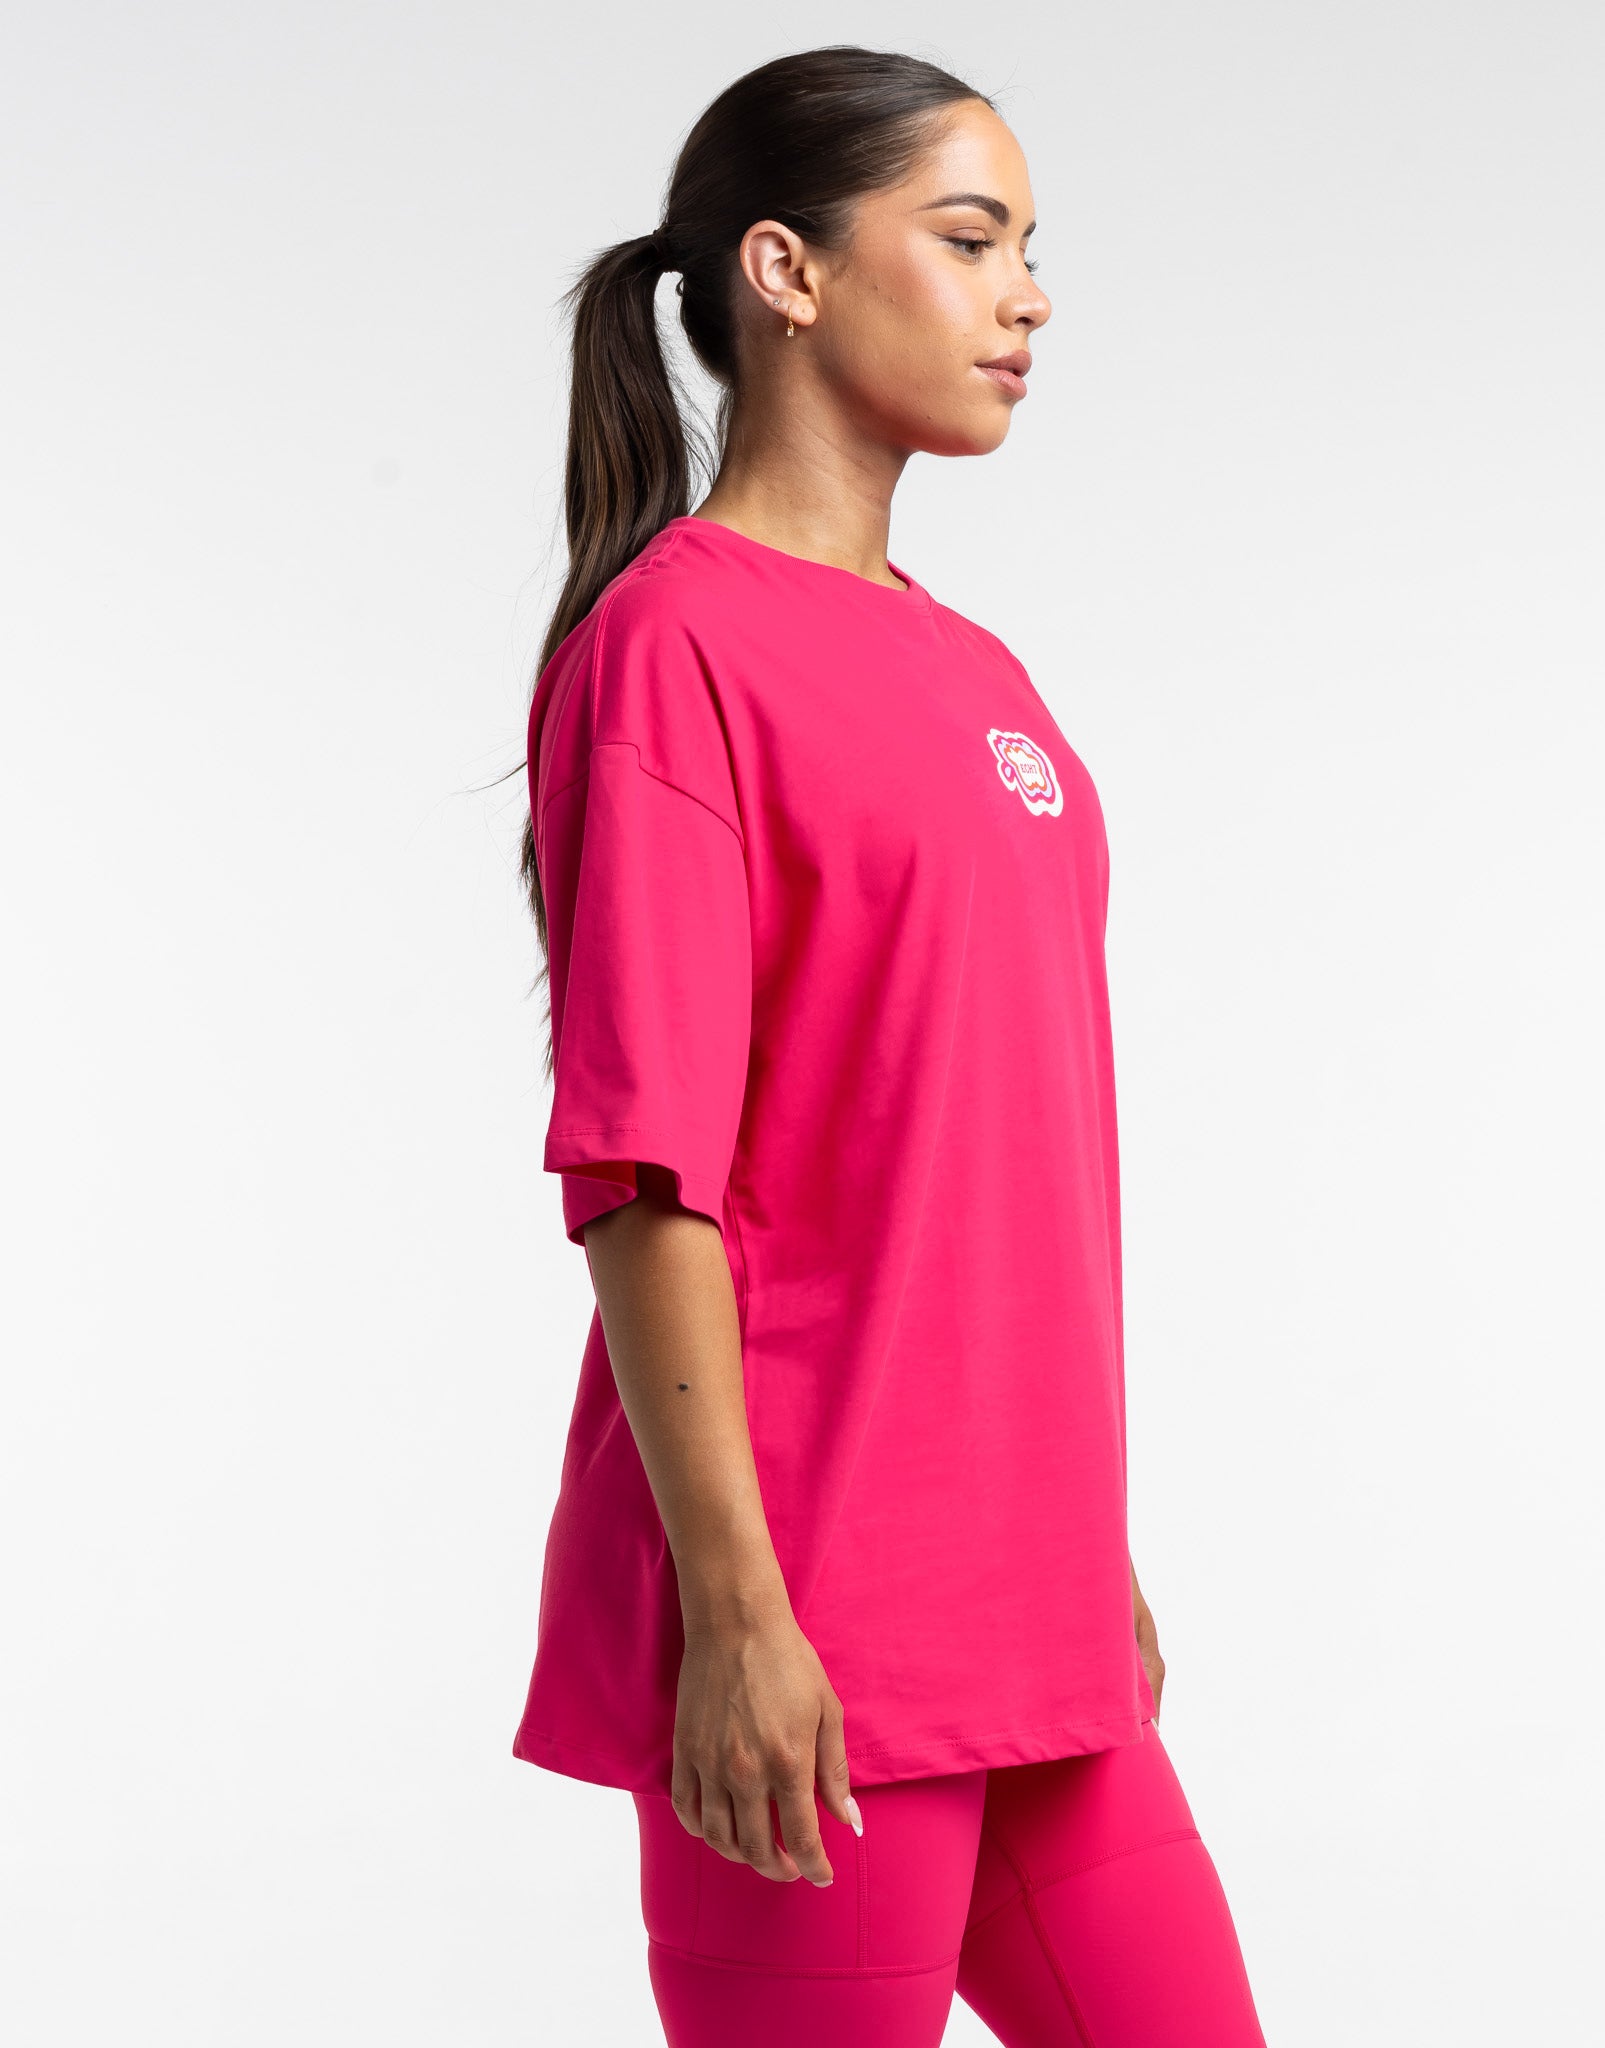 Colour Wave Oversize Tee - Bright Pink